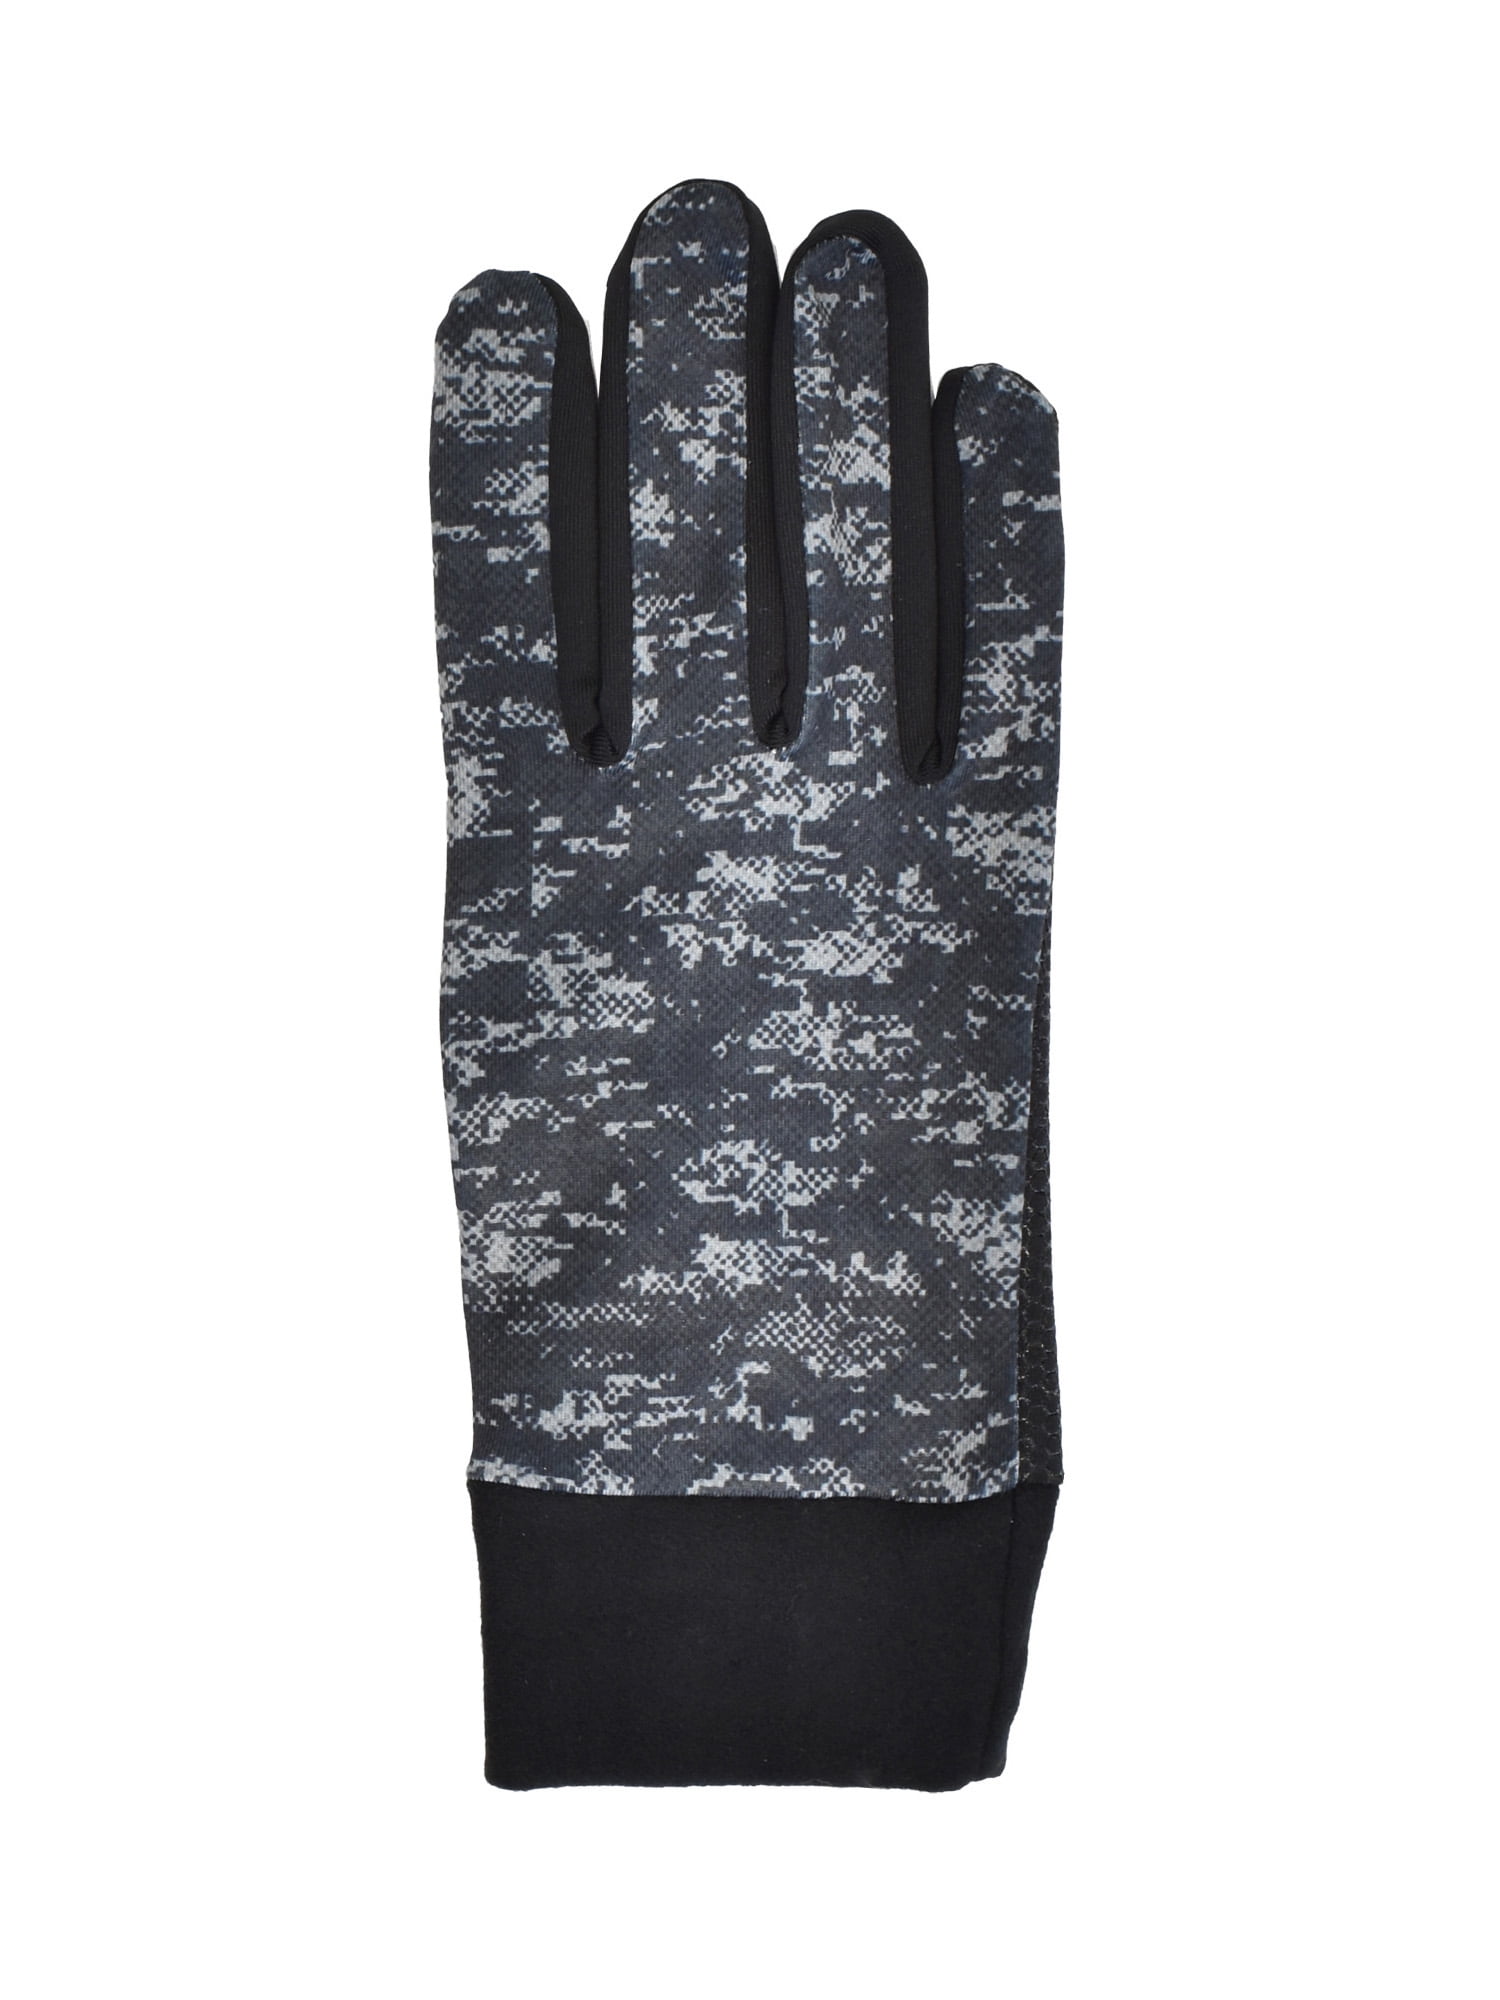 DICKIES 3 Pairs of Knit Gloves w//Suede Fleece Lined Grey//Blk  One Size Fits Most